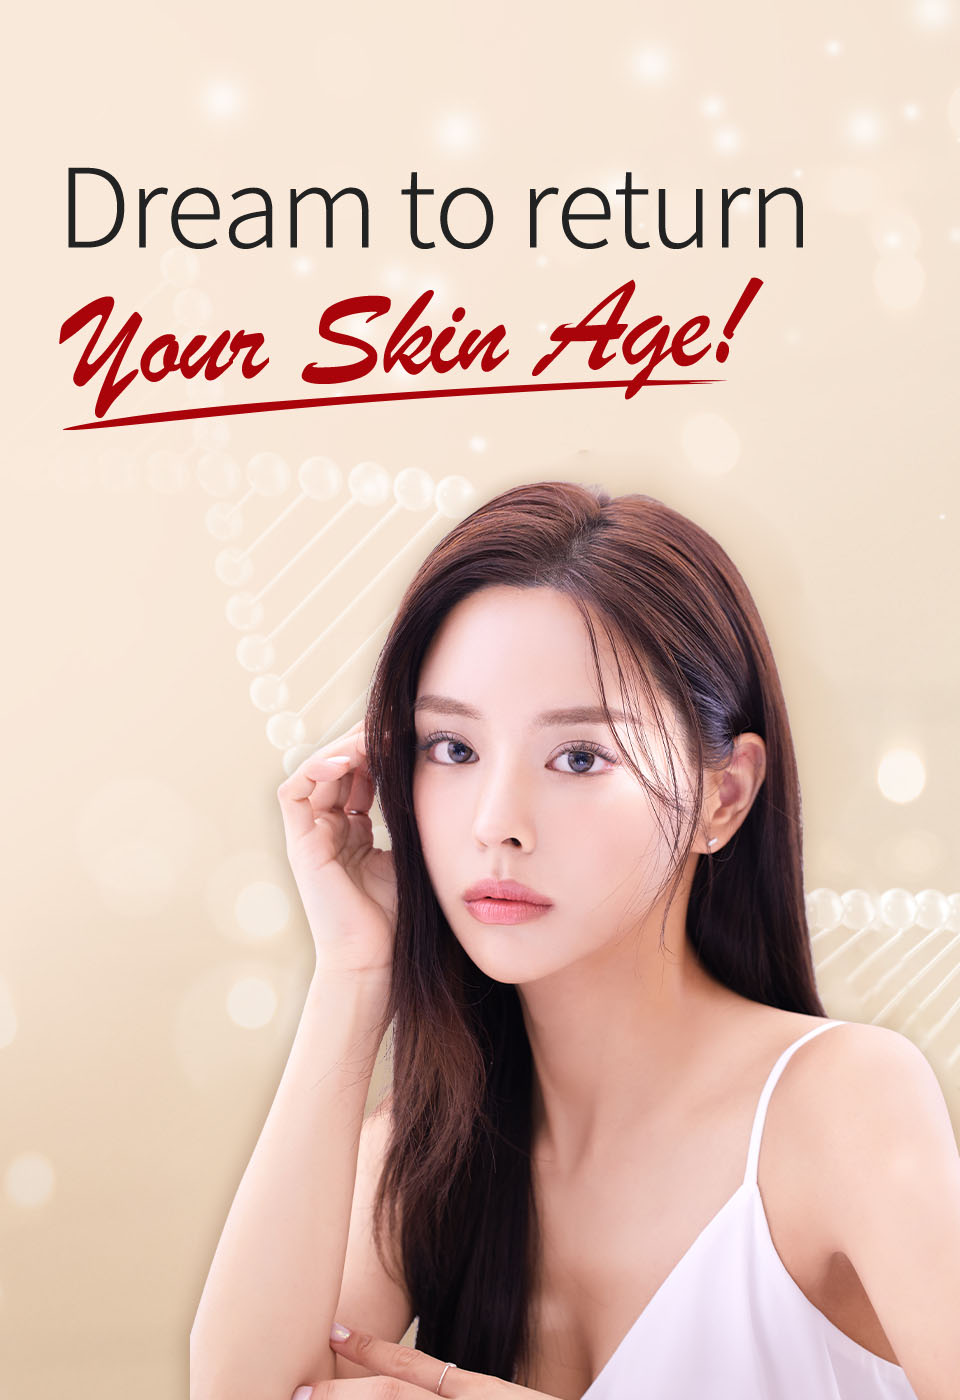 Dream to return your skin age!